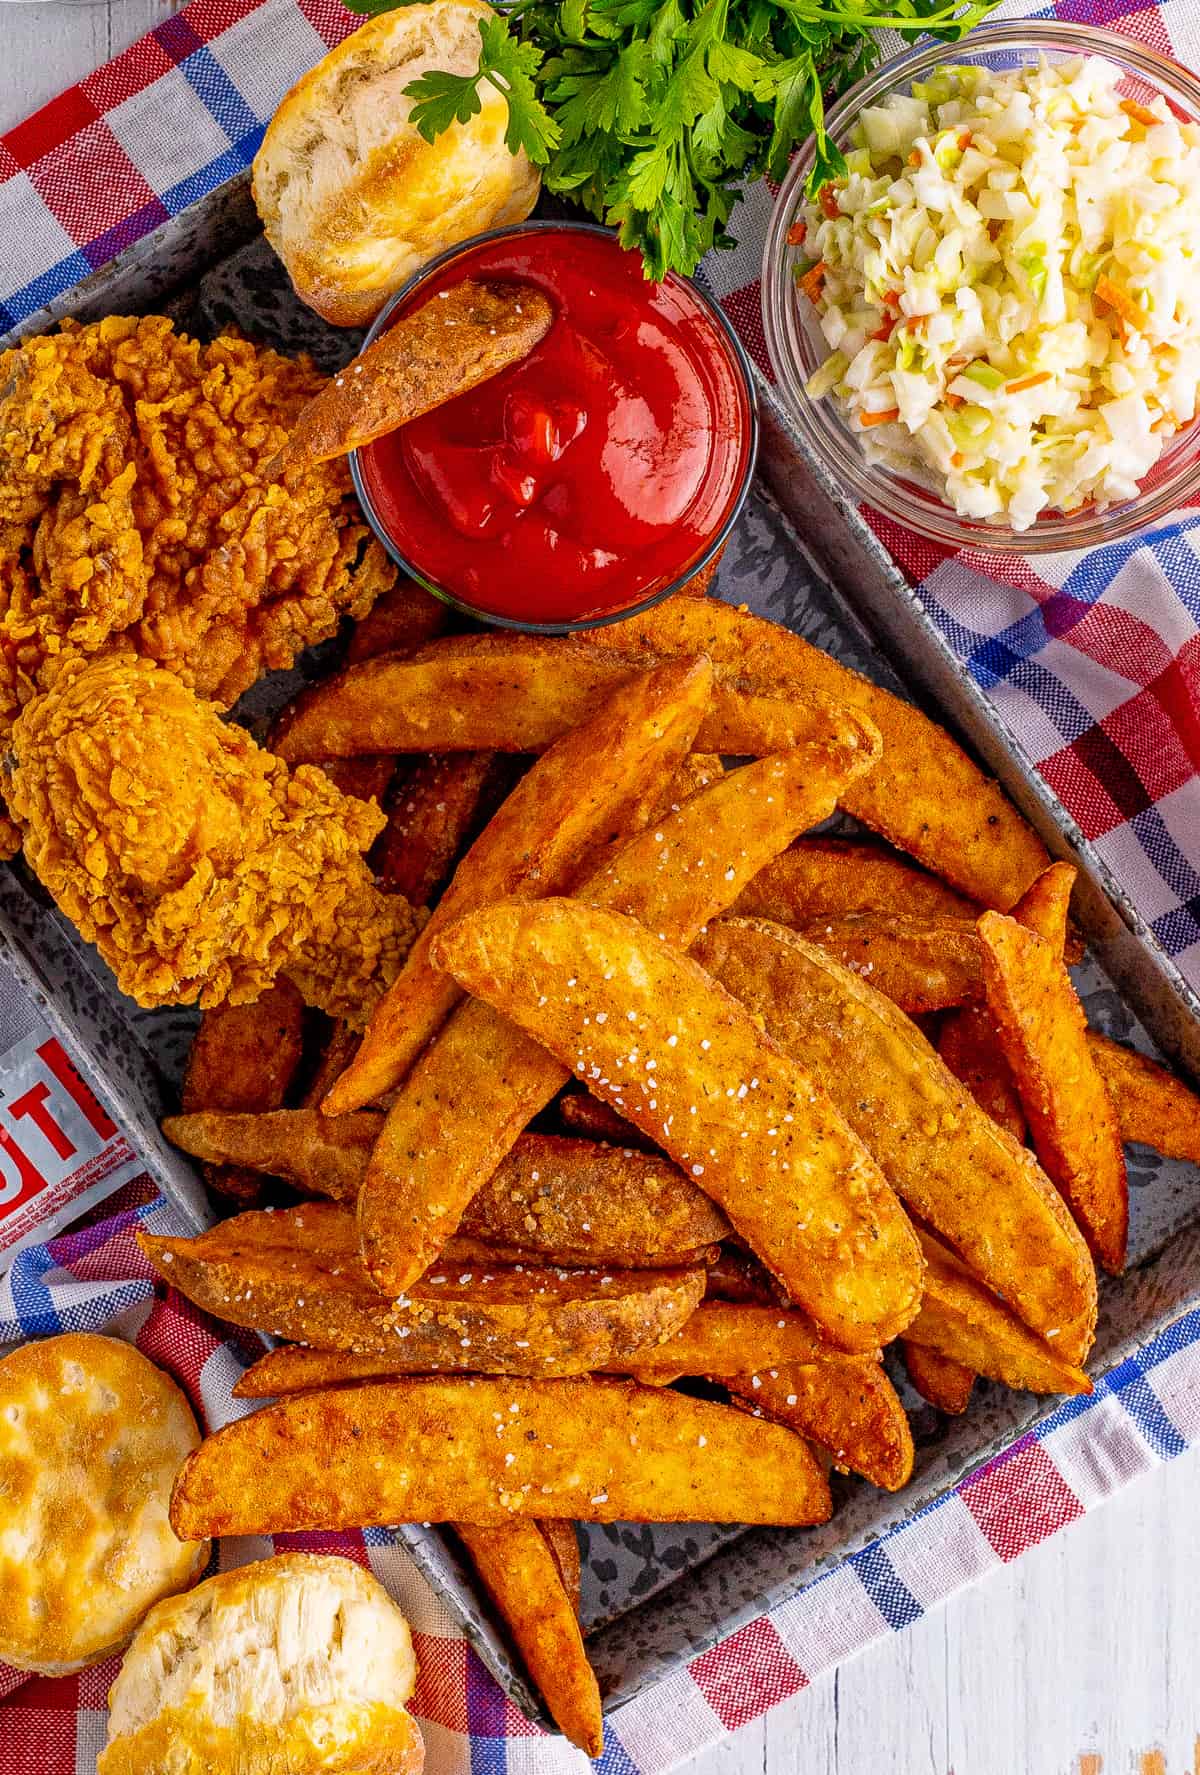 Overhead of Copycat KFC Potato Wedges in metal try with fried chicken, biscuits and coleslaw.